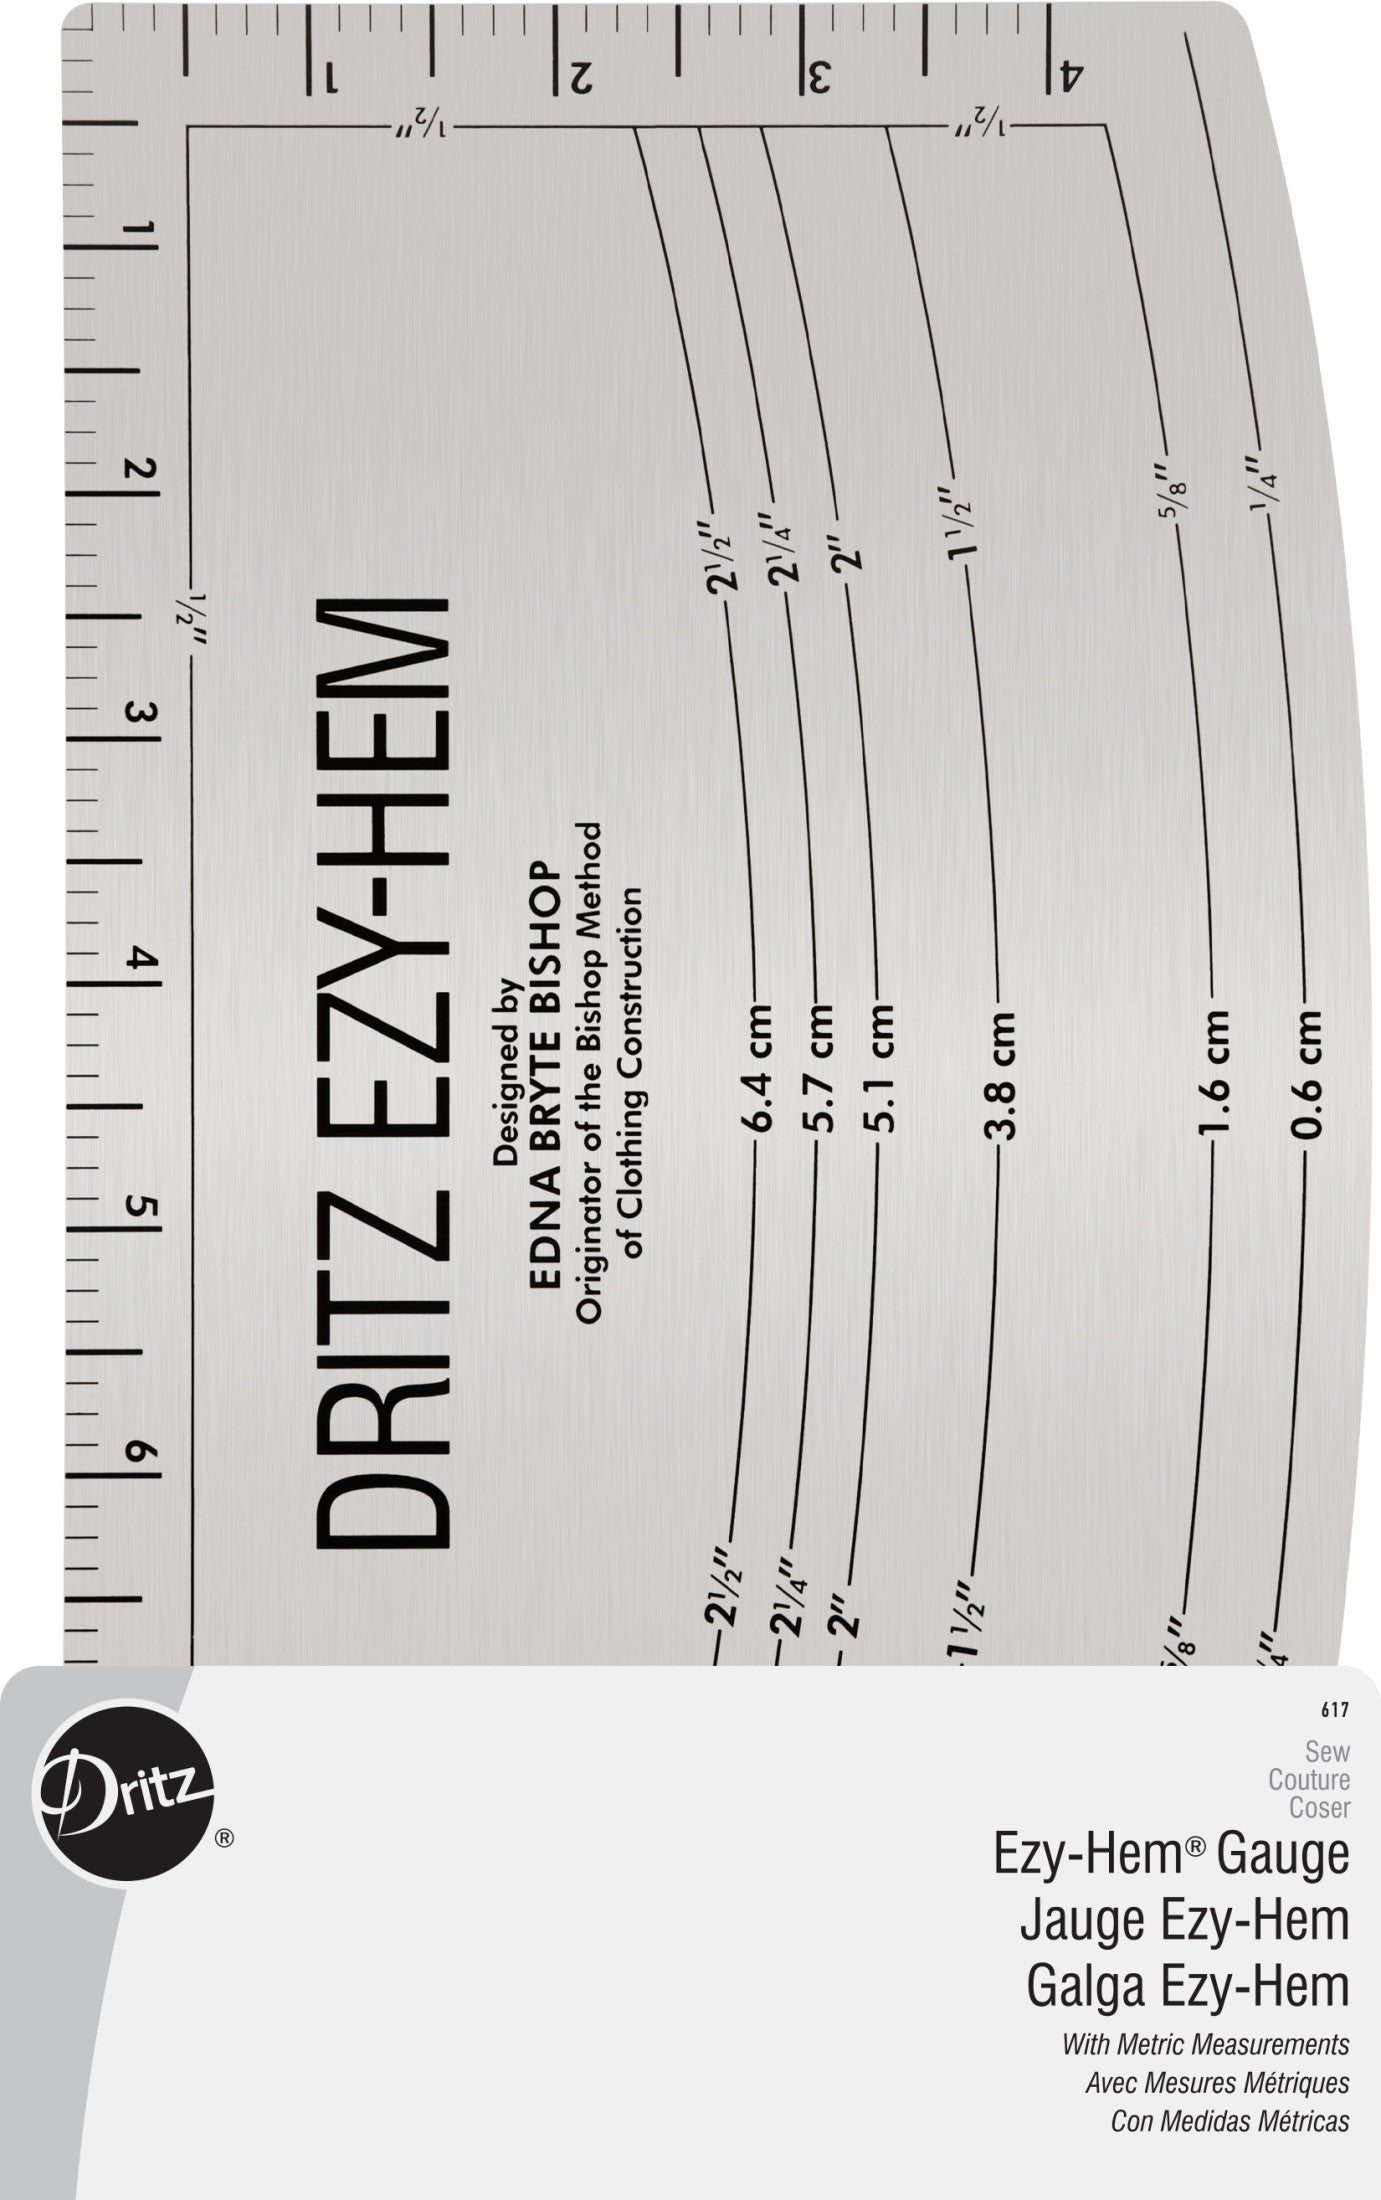 How to Use a Seam Gauge to Measure Waistbands and Hems 